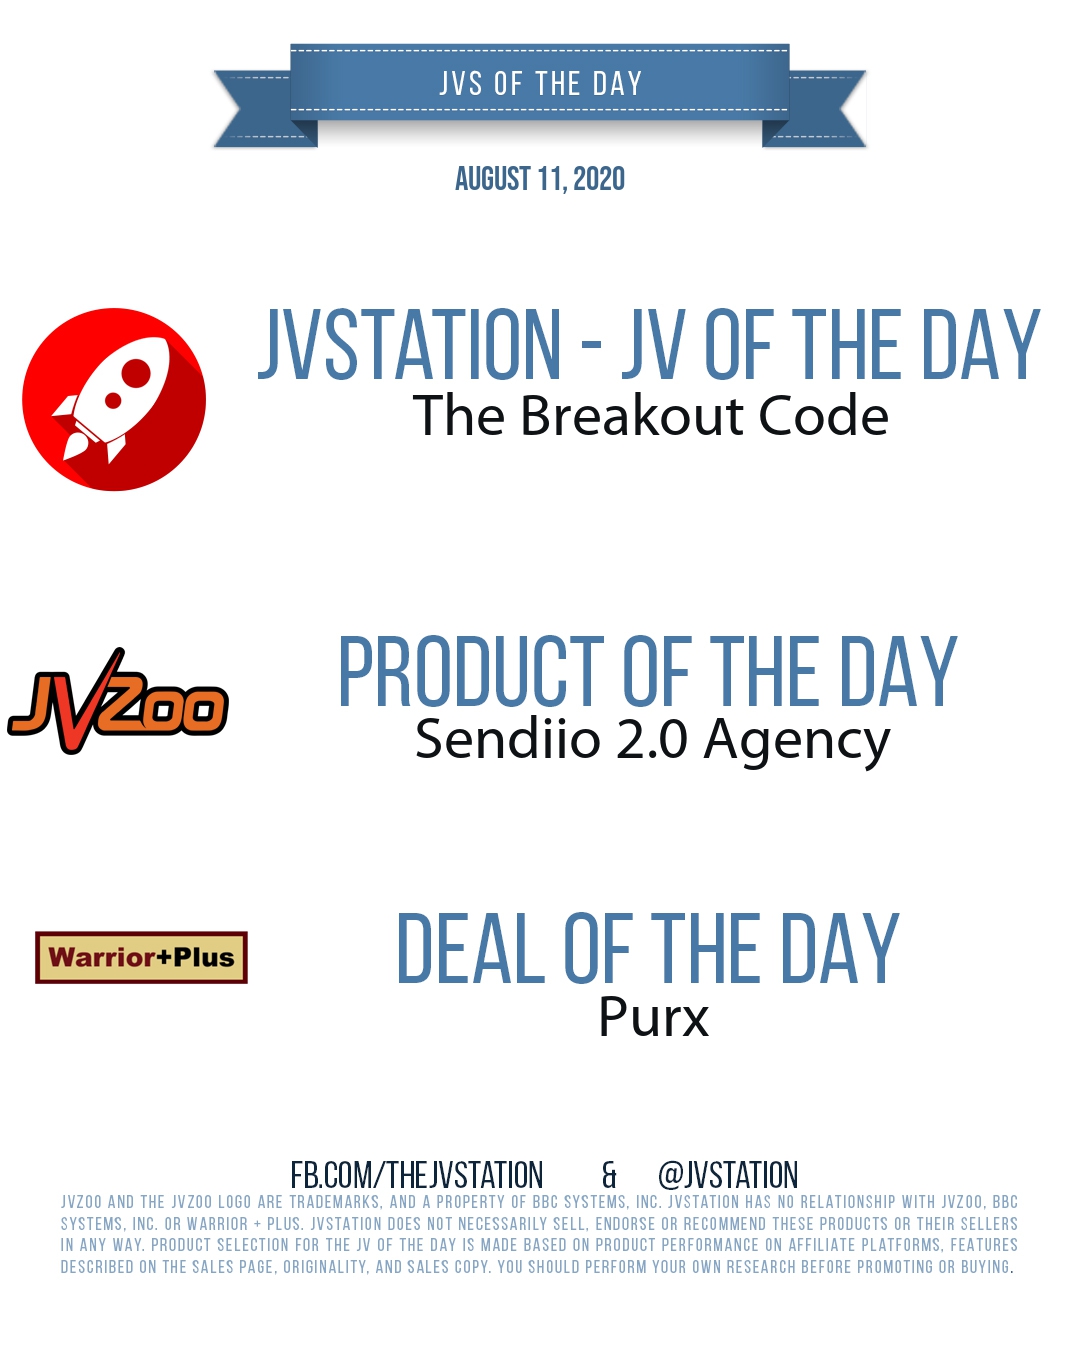 JVs of the day - August 11, 2020